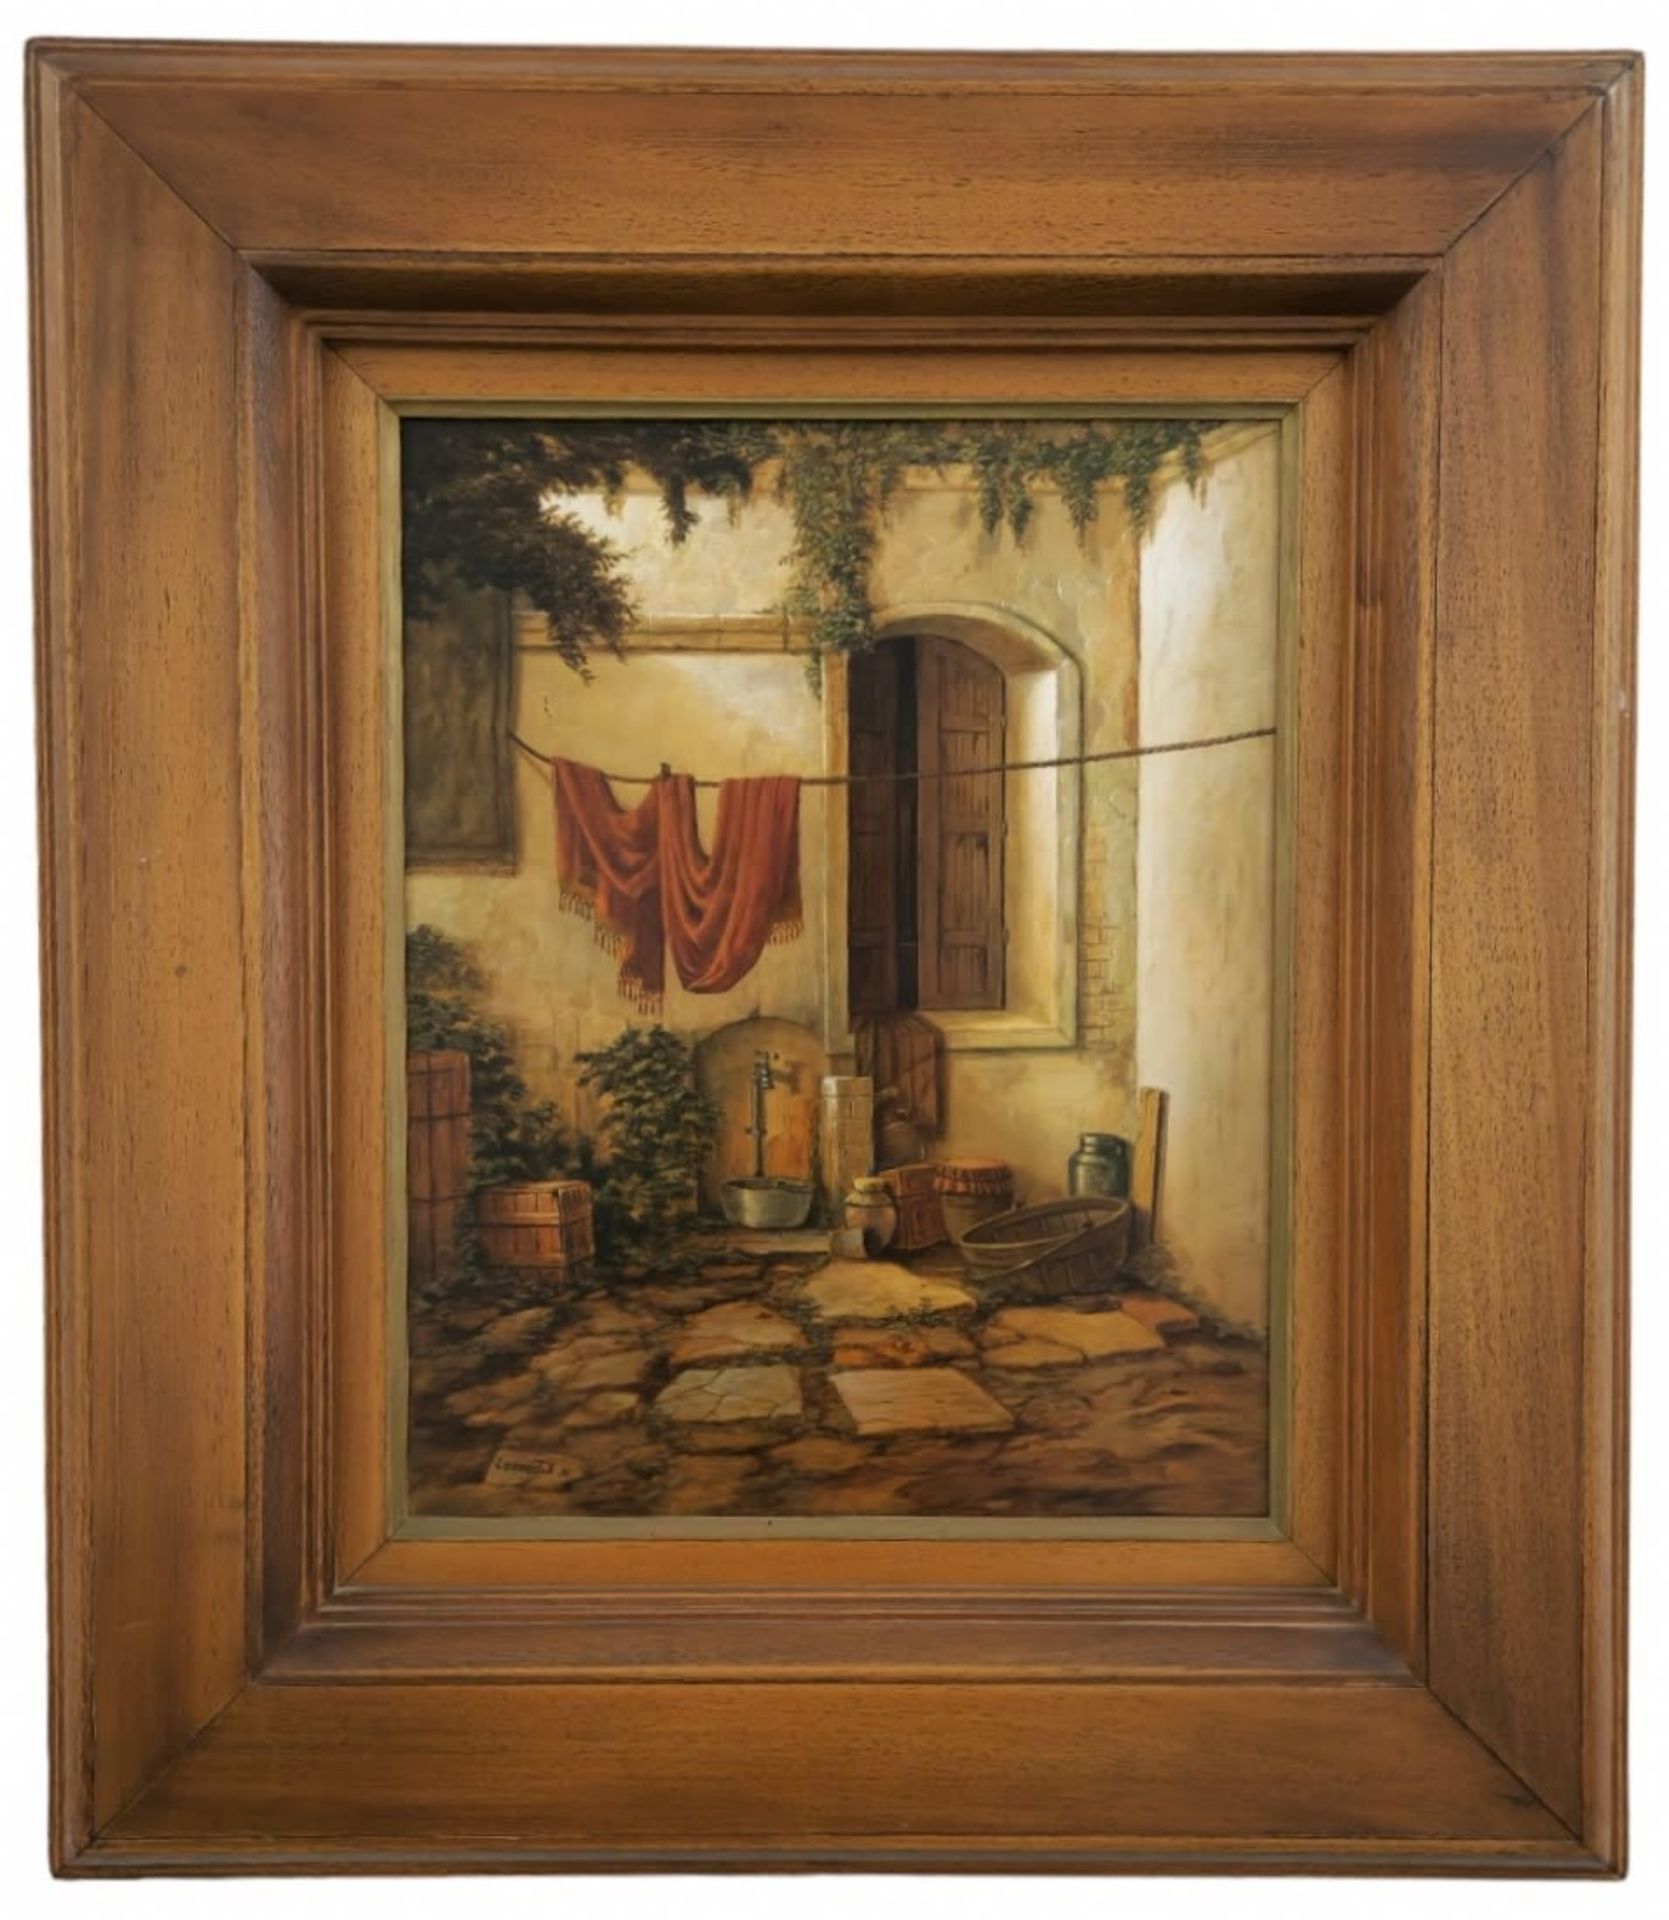 'The courtyard of the house' - Moni Leibovitch, oil on panel, signed, Dimensions: 44.5X35.5 cm, - Image 2 of 4